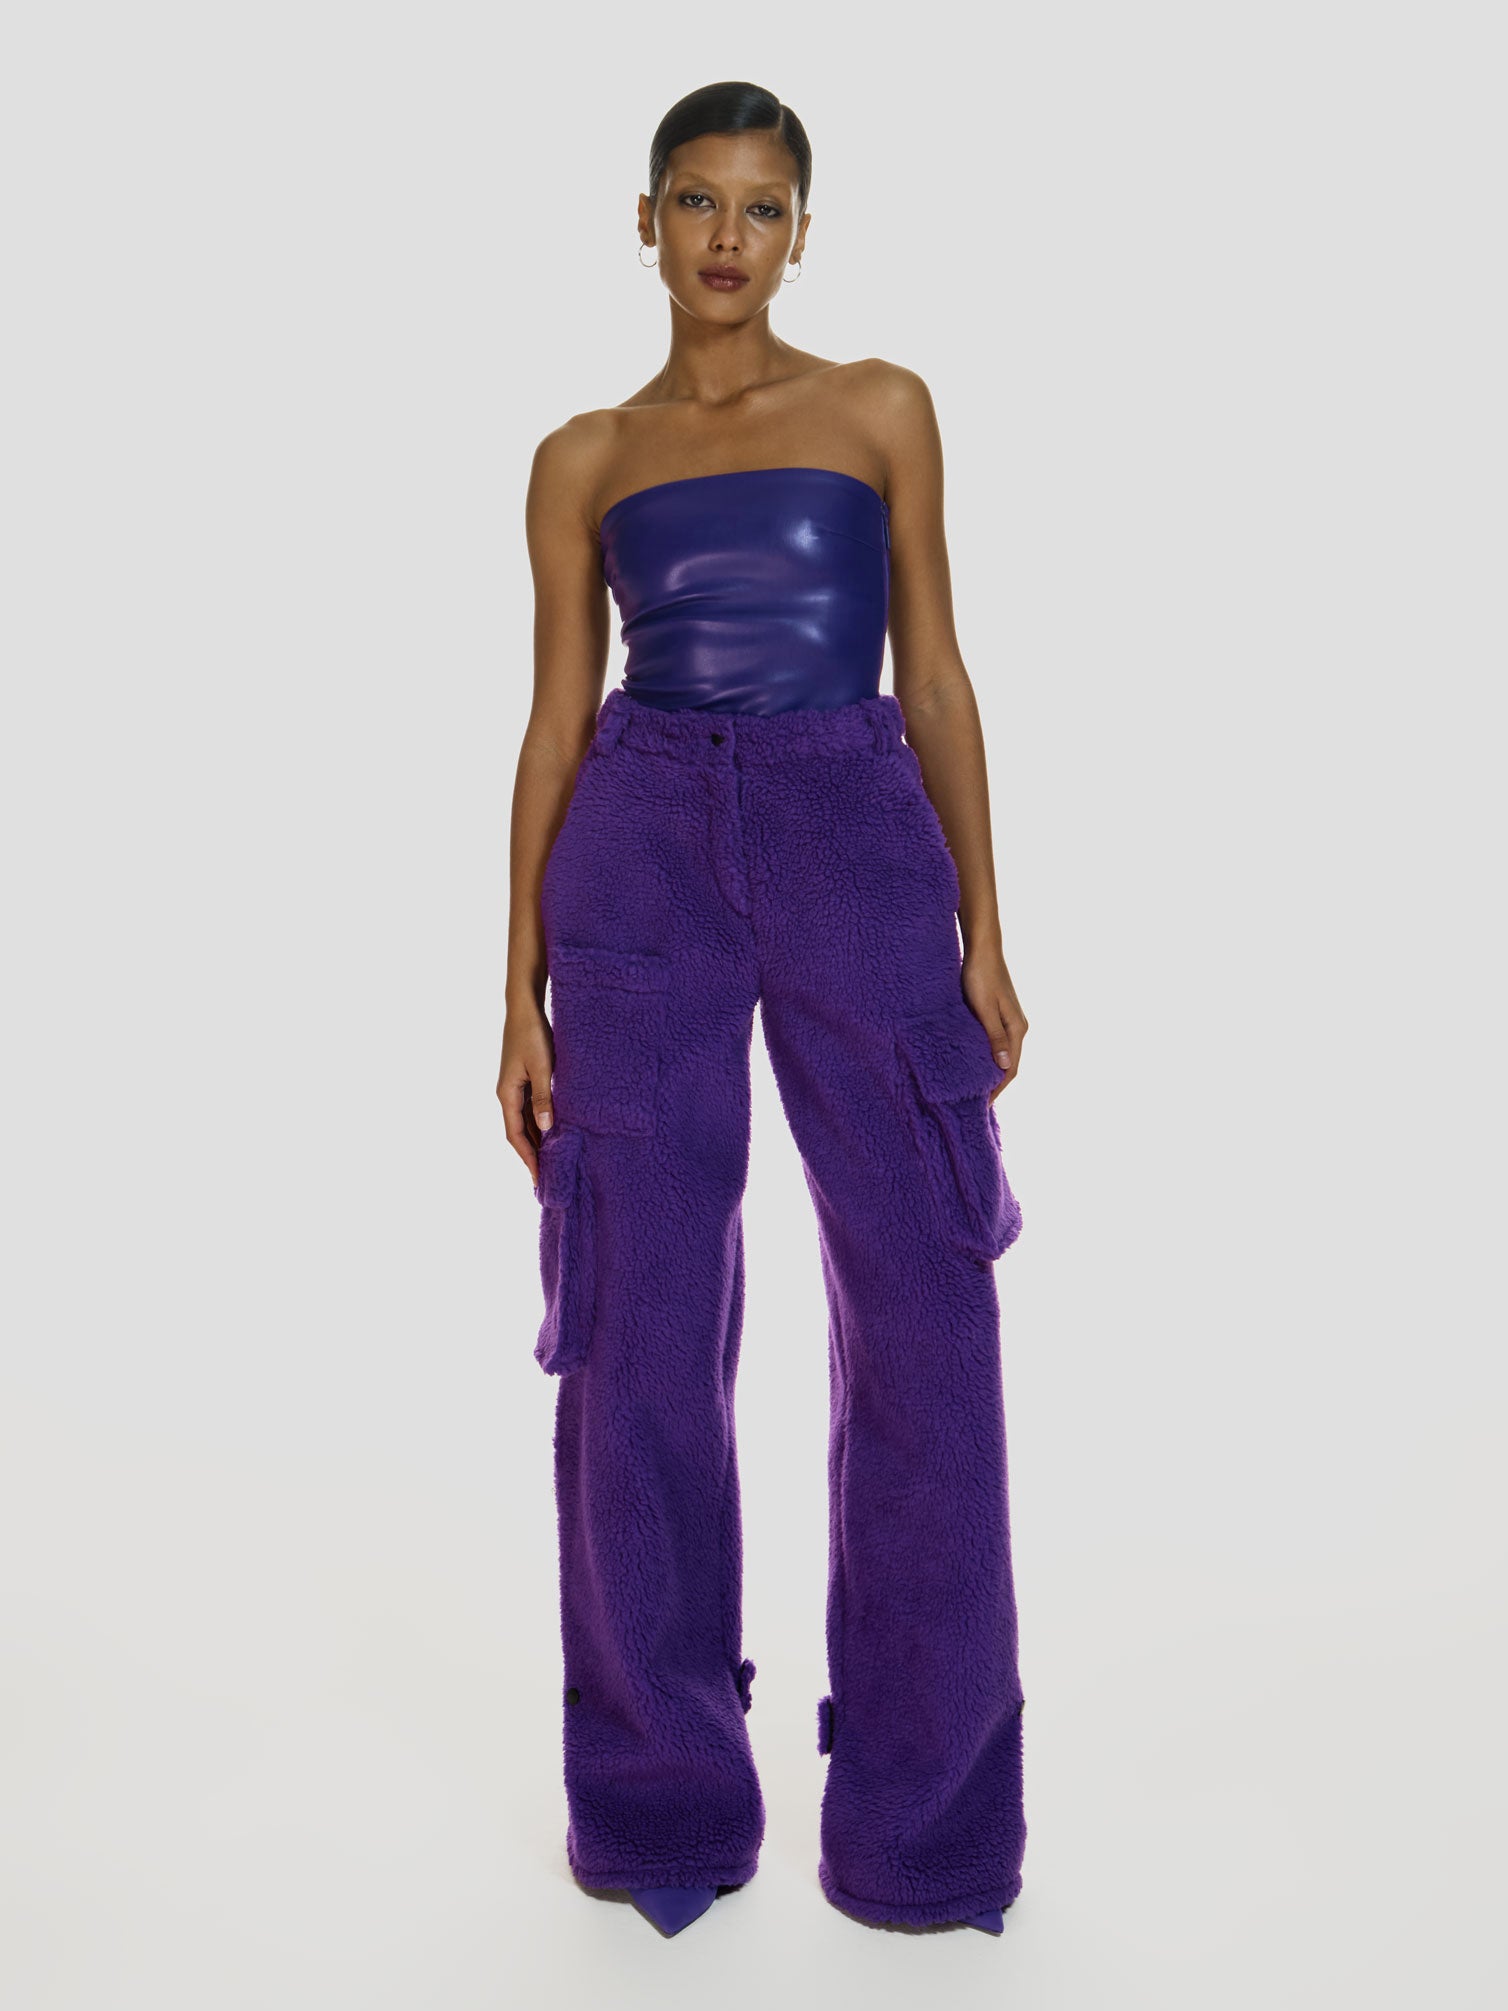 Full shot of a girl in a purple vegan leather tube top and purple polar fleece cargo pants